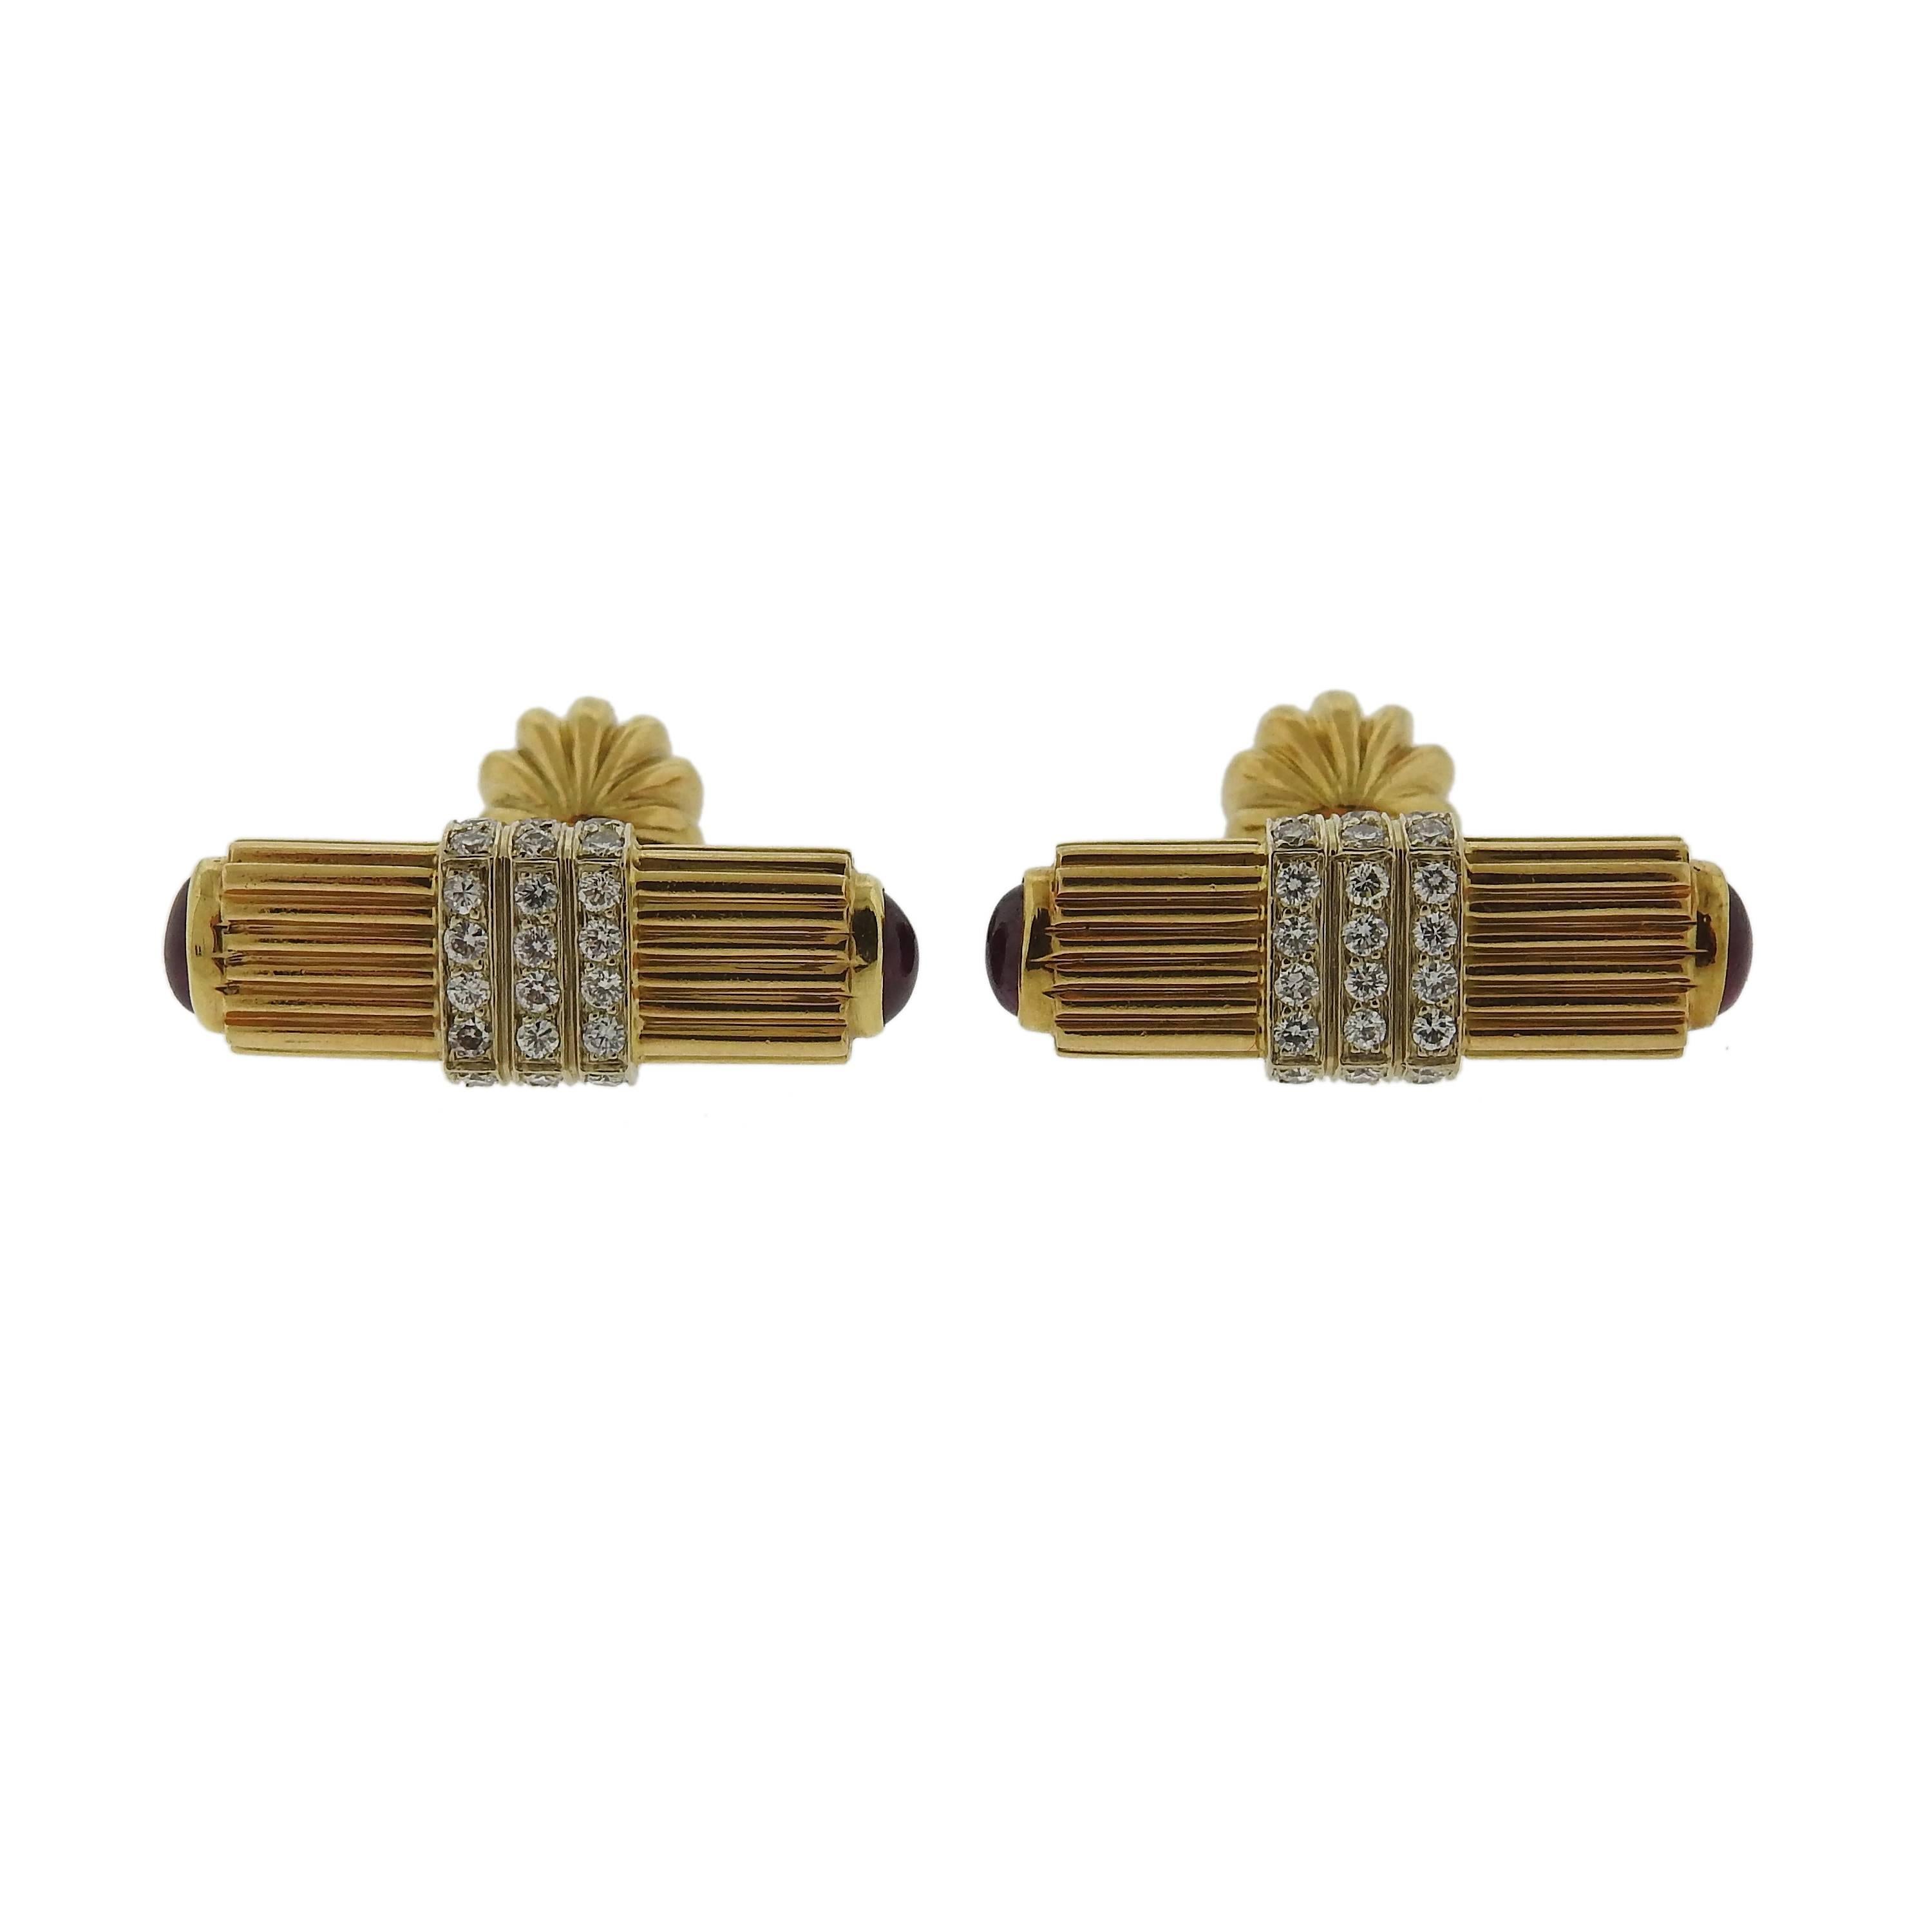 A pair of 18k gold cufflinks. Set with 0.72cw of H/SI diamonds and ruby cabochons. Cufflink tops measure 29mm X 11mm. Marked: CY 18k. Weight is 18.4 grams. 